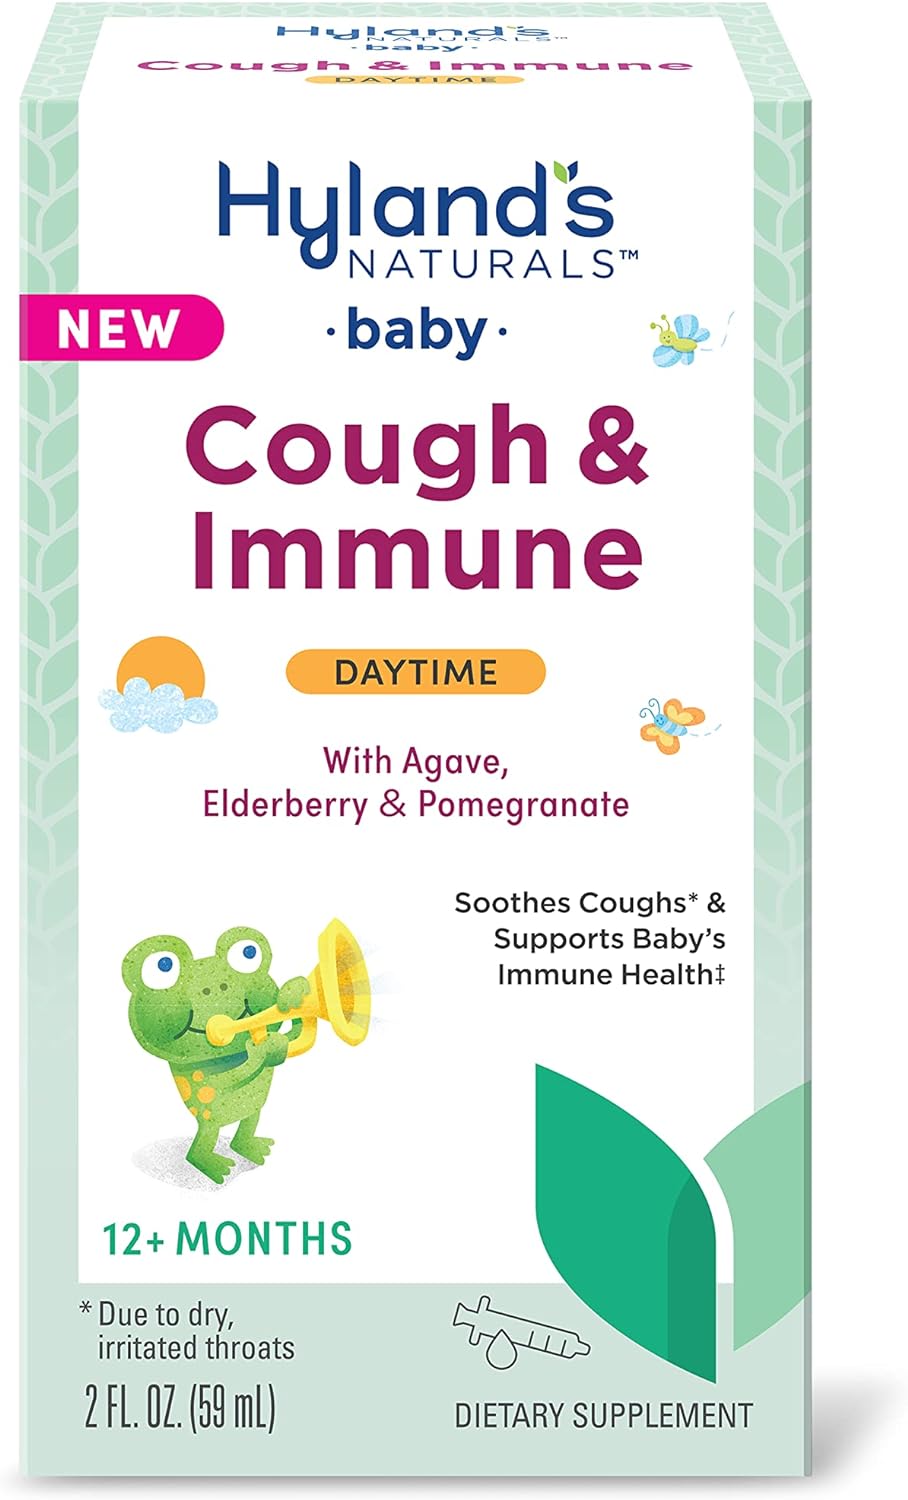 Hyland's Naturals Baby Cough & Immune with Agave, Elderberry & Pomegranate - Soothes Cough and Cold, & Supports Immunity - Daytime - 2 Fl. Oz